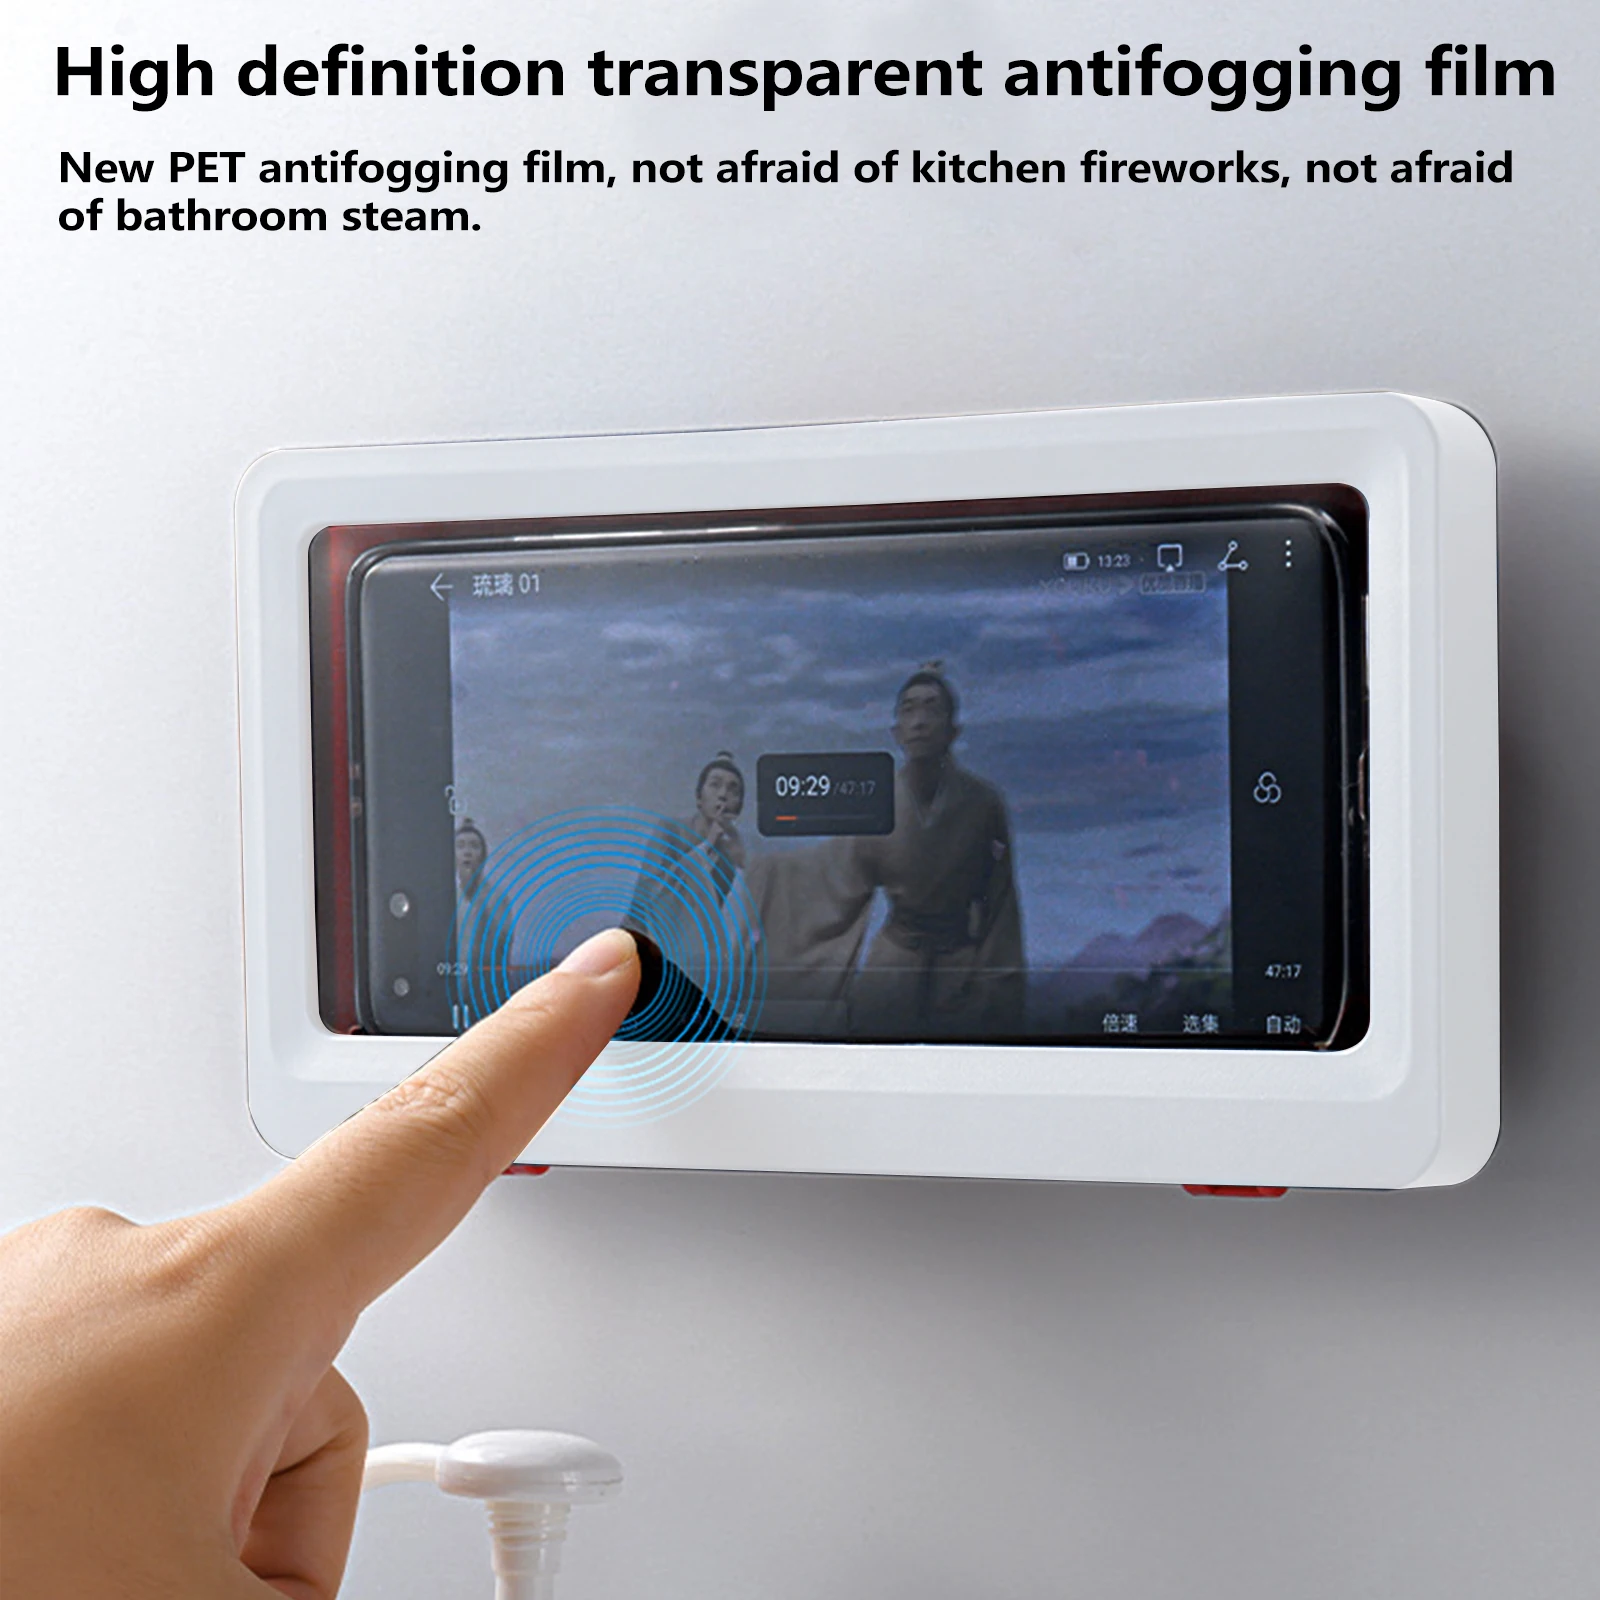 Bathroom Toilet Mobile Phone Holder Box Wall Mounted Soap Bracket 6 Inch Phone Storage Case Waterproof Shower Watching Holder phone holder for car cup holder